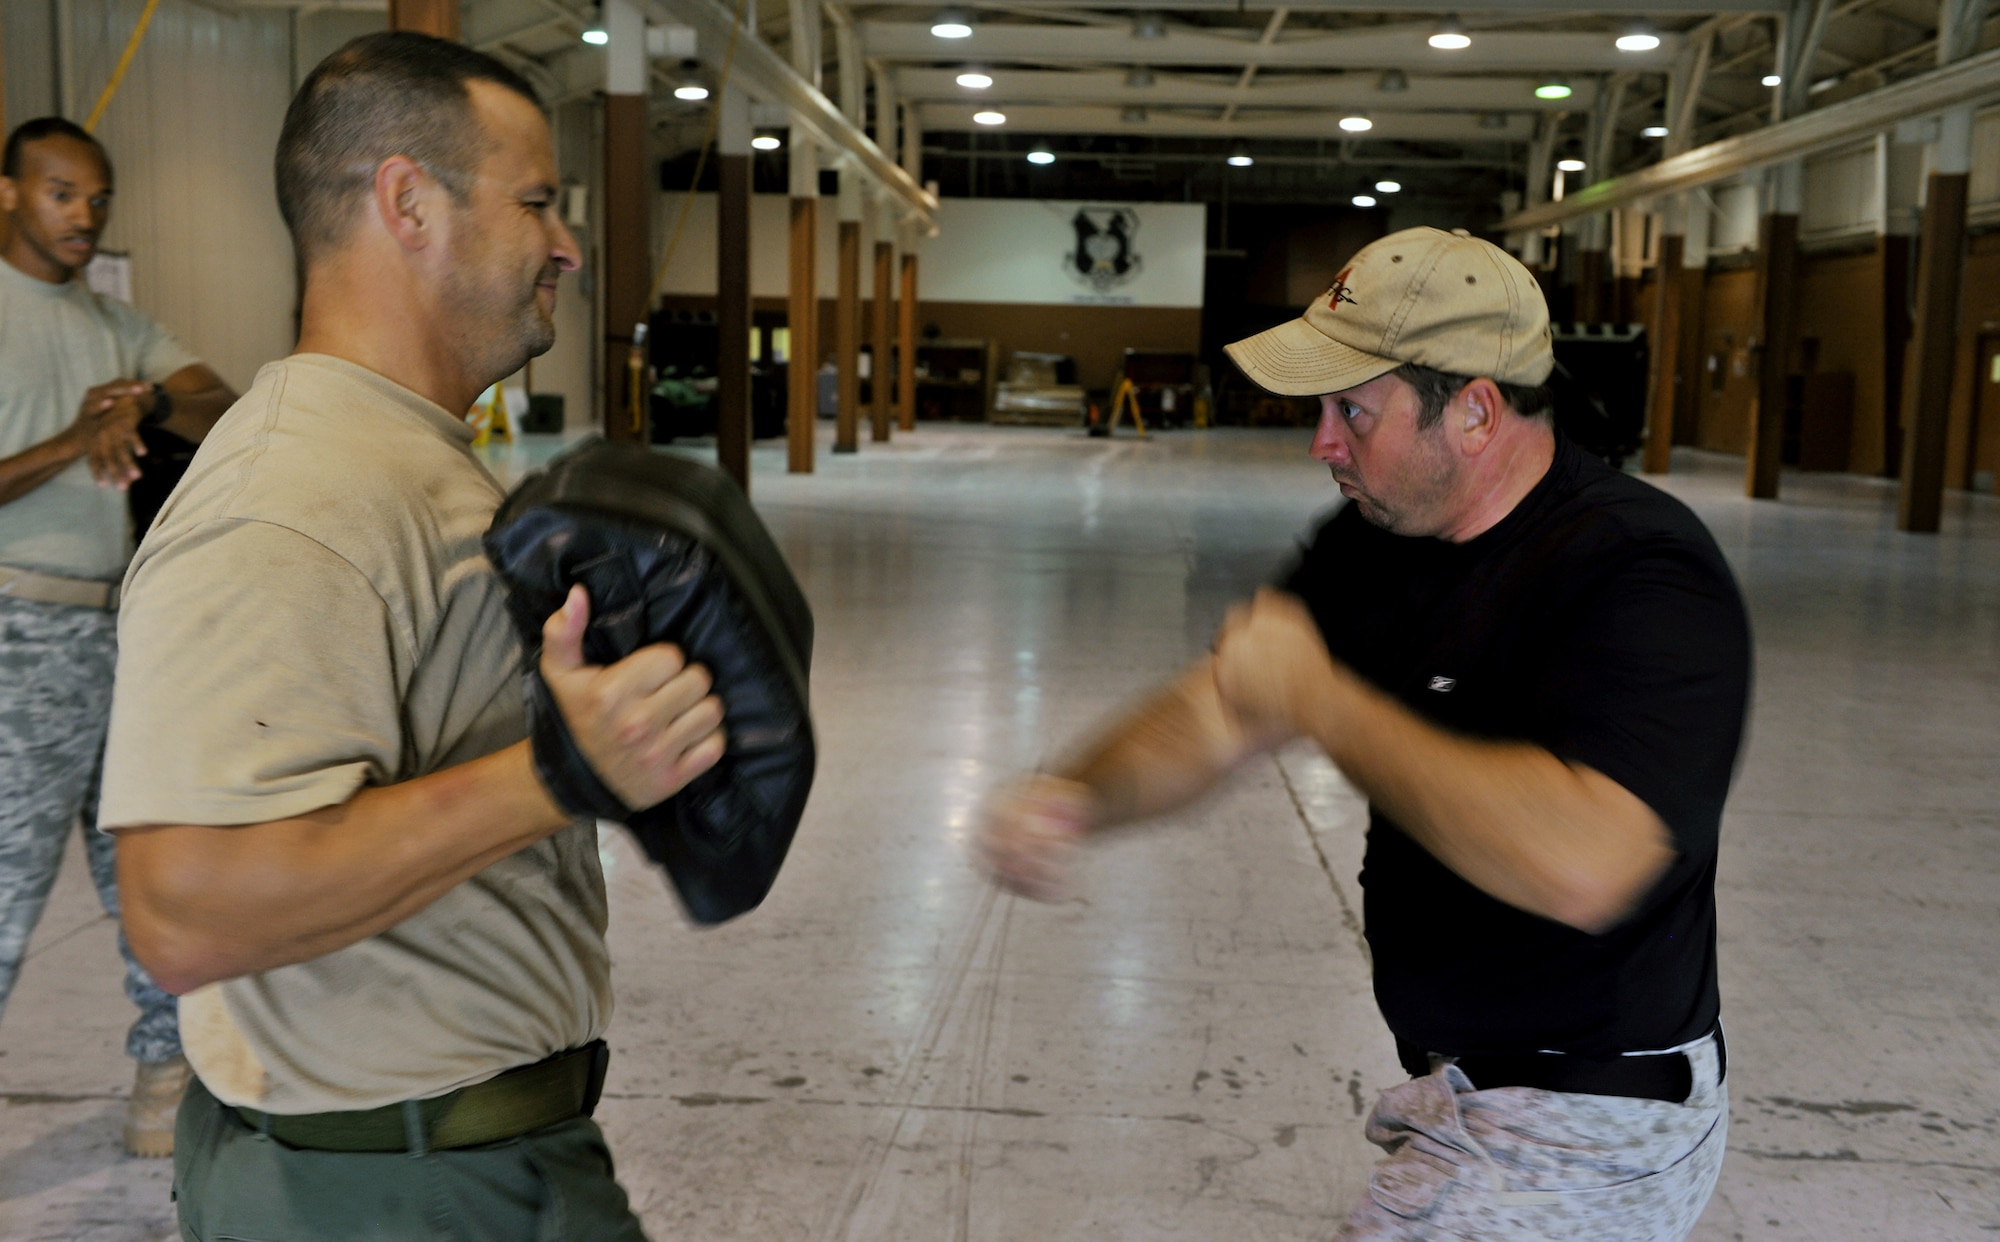 Lt. Joseph Dukes punches a bag held by Steve Jarrmaillo during a Krav Maga timed combat session Oct. 14, 2010 at Moody Air Force Base, Ga. One part of training for Krav Maga is conditioning, before practicing a technique, instructors lead members through a vigorous conditioning session. Lieutenant Dukes is a Lowndes County Sheriff's Department Special Weapons and Tactics team leader and training coordinator. Mr. Jarrmaillo is a Lowndes County Sheriff's Department reserve deputy. (U.S. Air Force photo/Airman 1st Class Joshua Green)